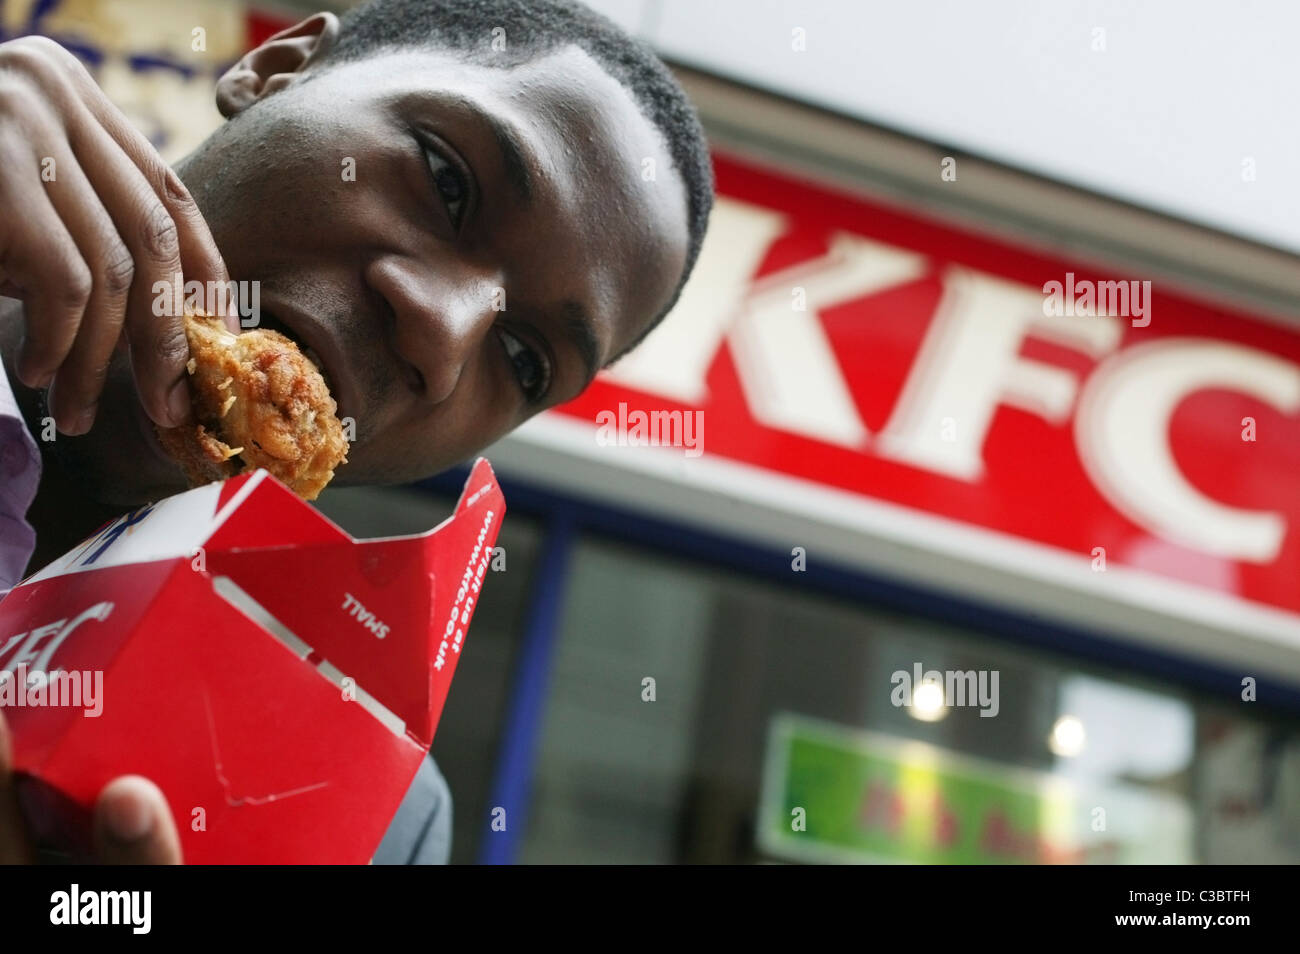 Illustrative image of KFC; part of the YUM! Brands group. Stock Photo